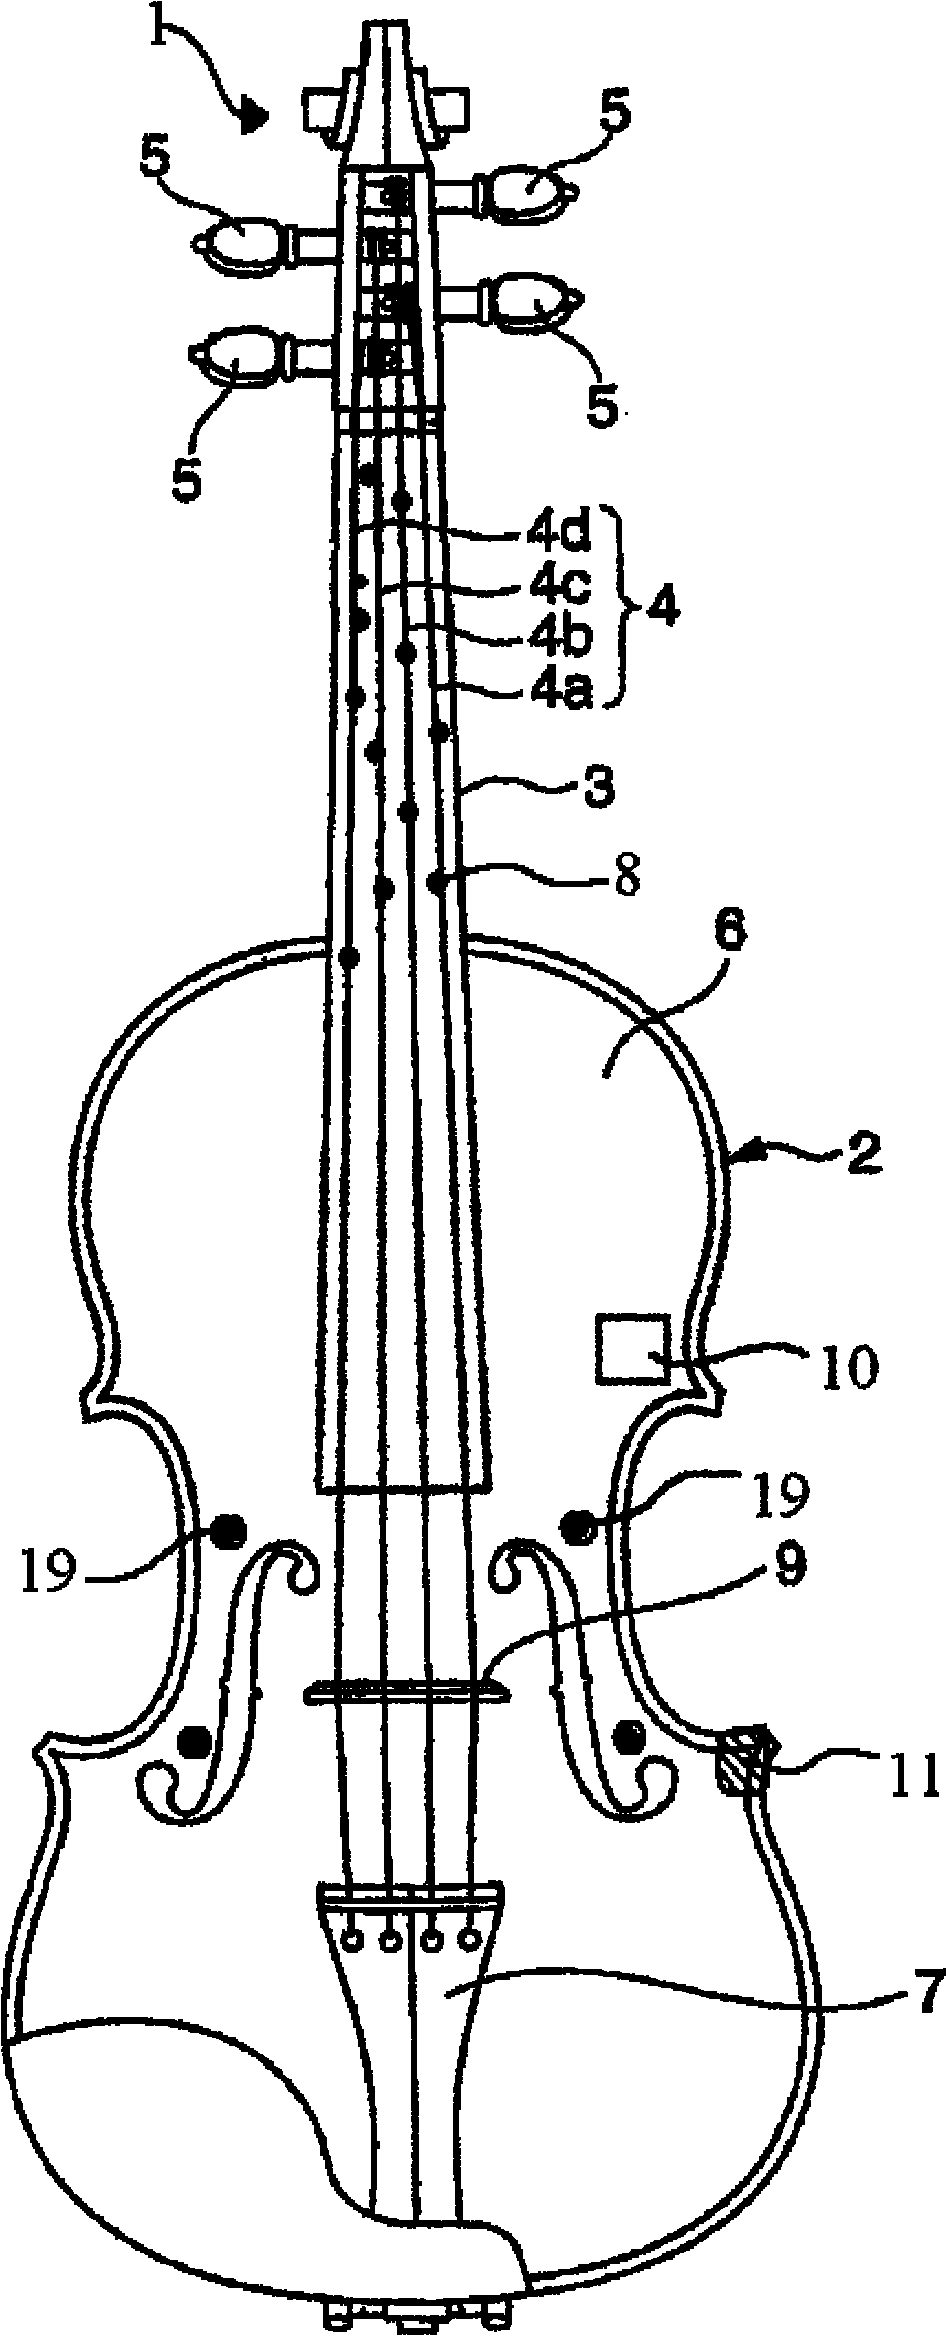 Digital stringed instrument controlled by microcomputer